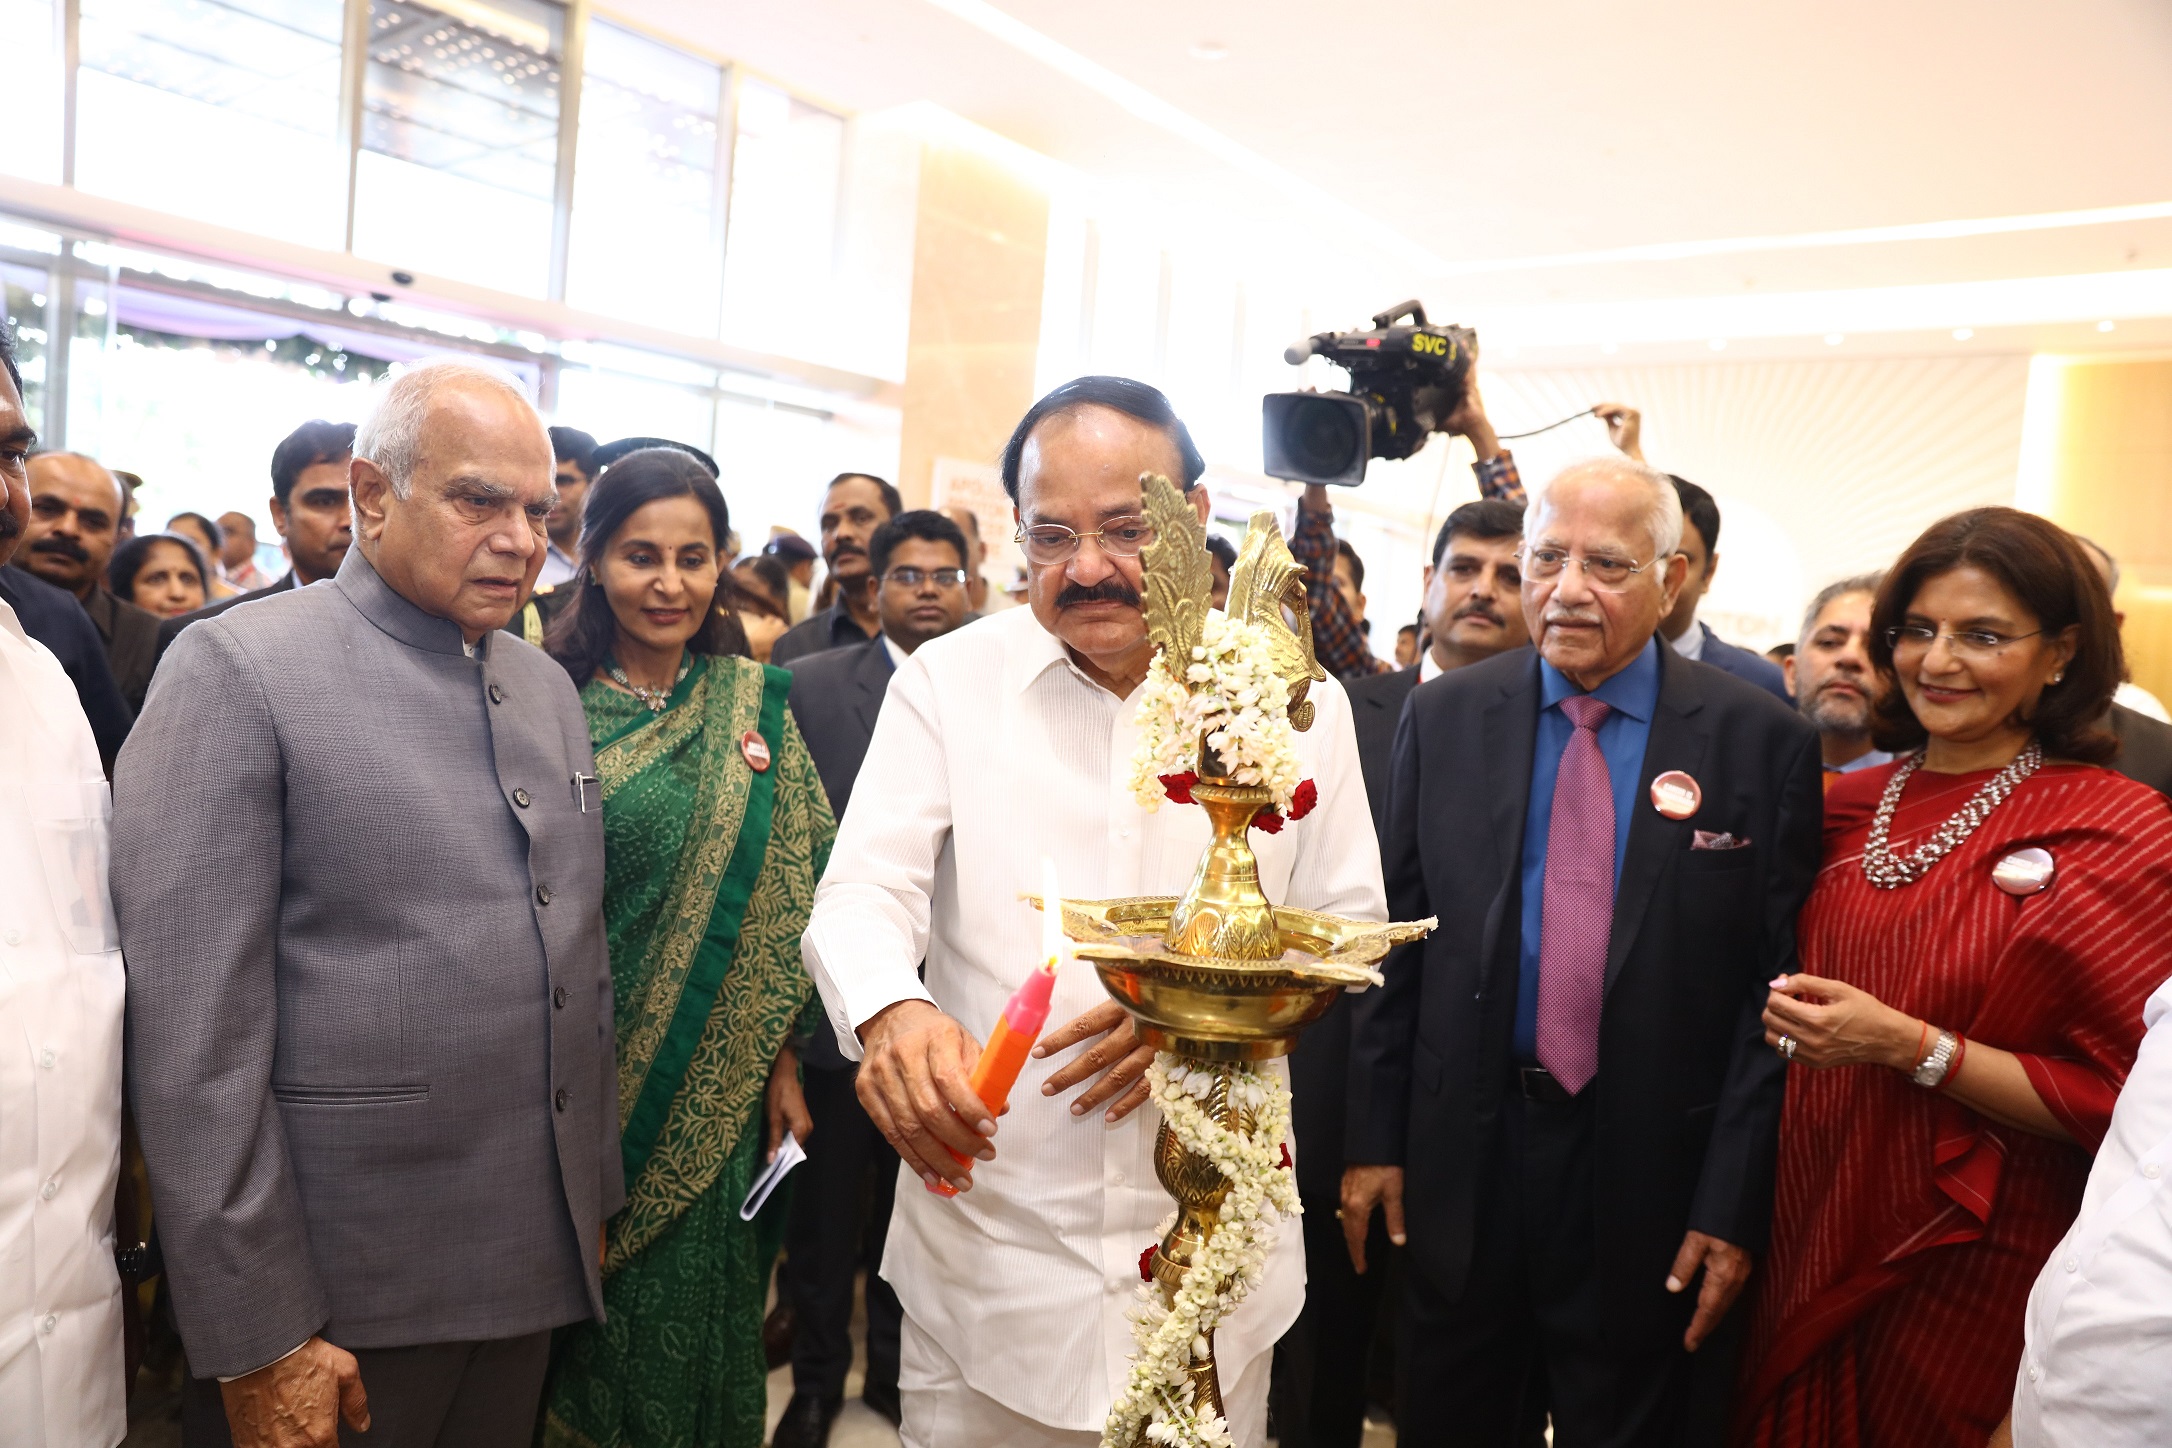 The Apollo Proton Cancer Centre inaugurated in Chennai, Tamil Nadu, India today by the Hon'ble Vice President of India, Shri Venkaiah Naidu along with Dr. Prathap C. Reddy, Chairman, Apollo Hospitals Group, Ms. Preetha Reddy, Vice Chairperson, Apollo Hospitals Group and Ms. Suneeta Reddy, Managing Director, Apollo Hospitals Group - Photo By Sachin Murdeshwar GPN News Network 